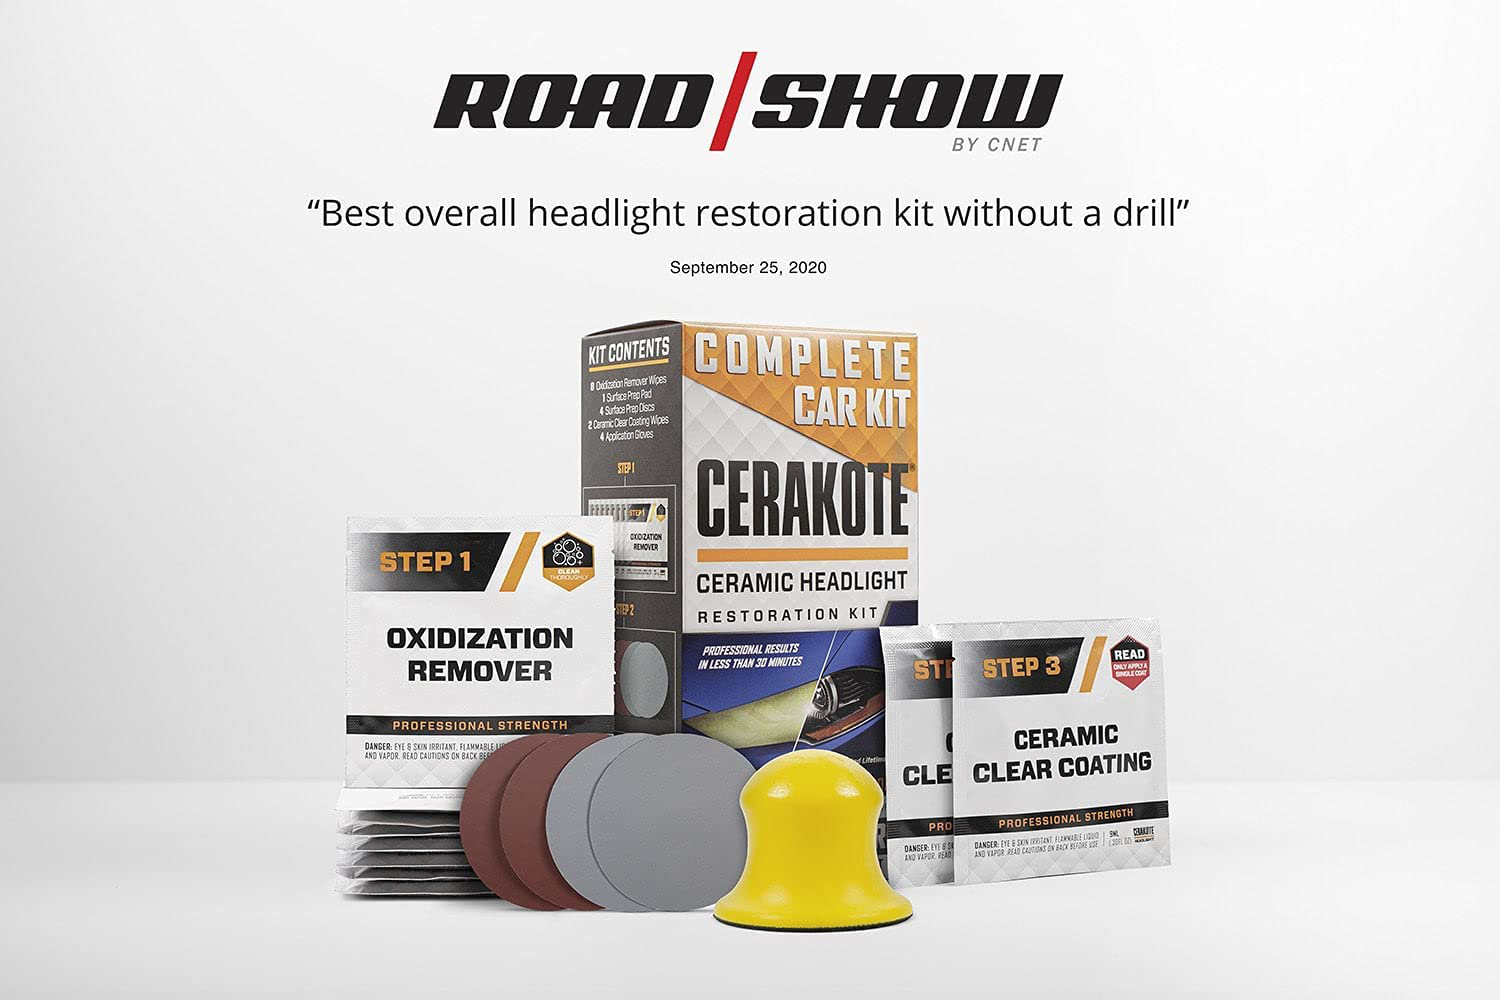 CERAKOTE Ceramic Headlight Restoration Kit – Guaranteed To Last As Long As You Own Your Vehicle – Brings Headlights back to Like New Condition - 3 Easy Steps - No Power Tools Required